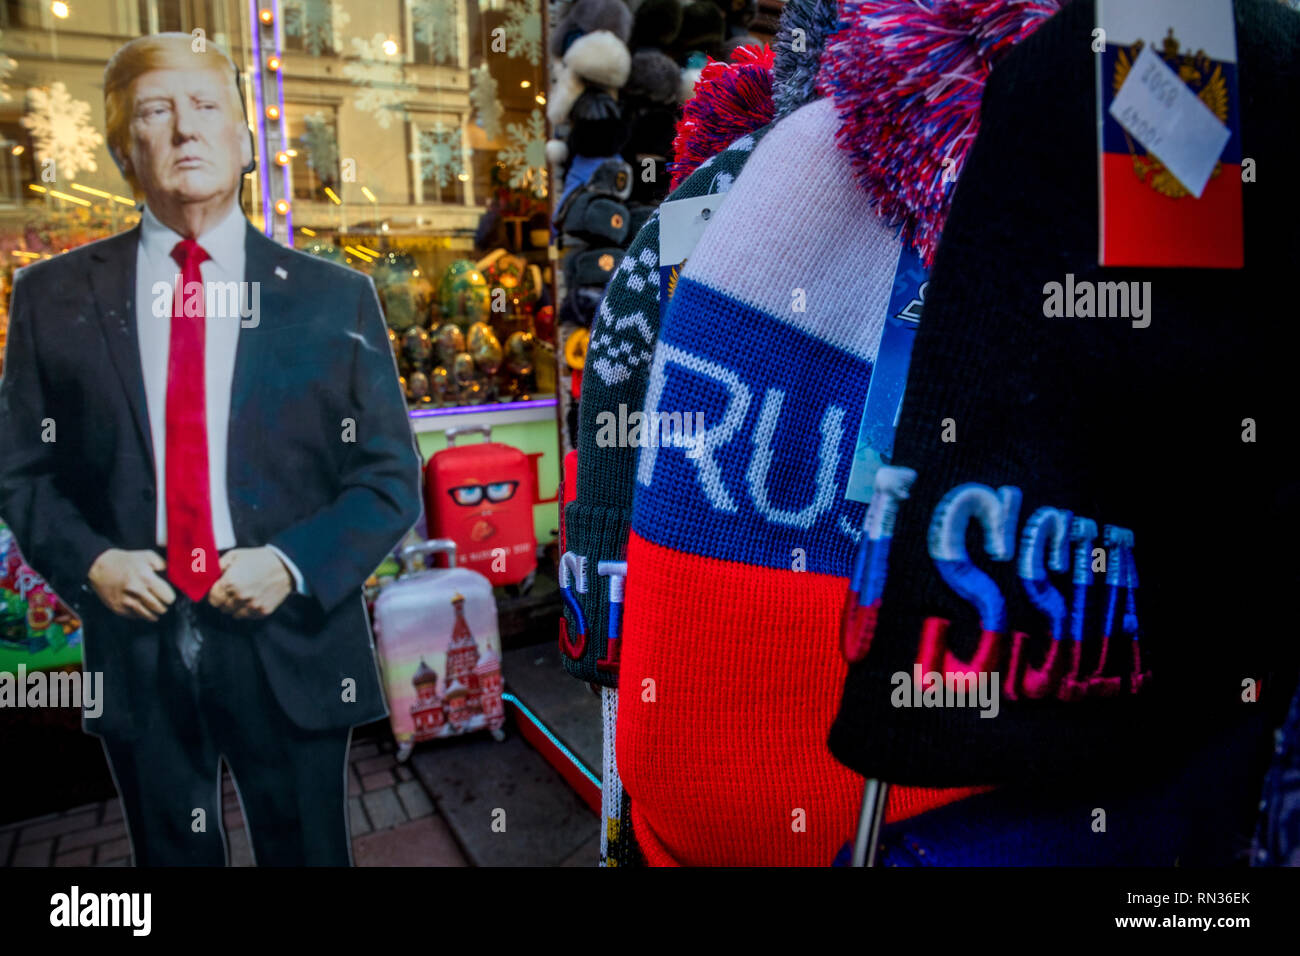 The full-length portrait of Donald Trump is installed near an entrance of a souvenir shop on Arbat street in the center of Moscow, Russia Stock Photo